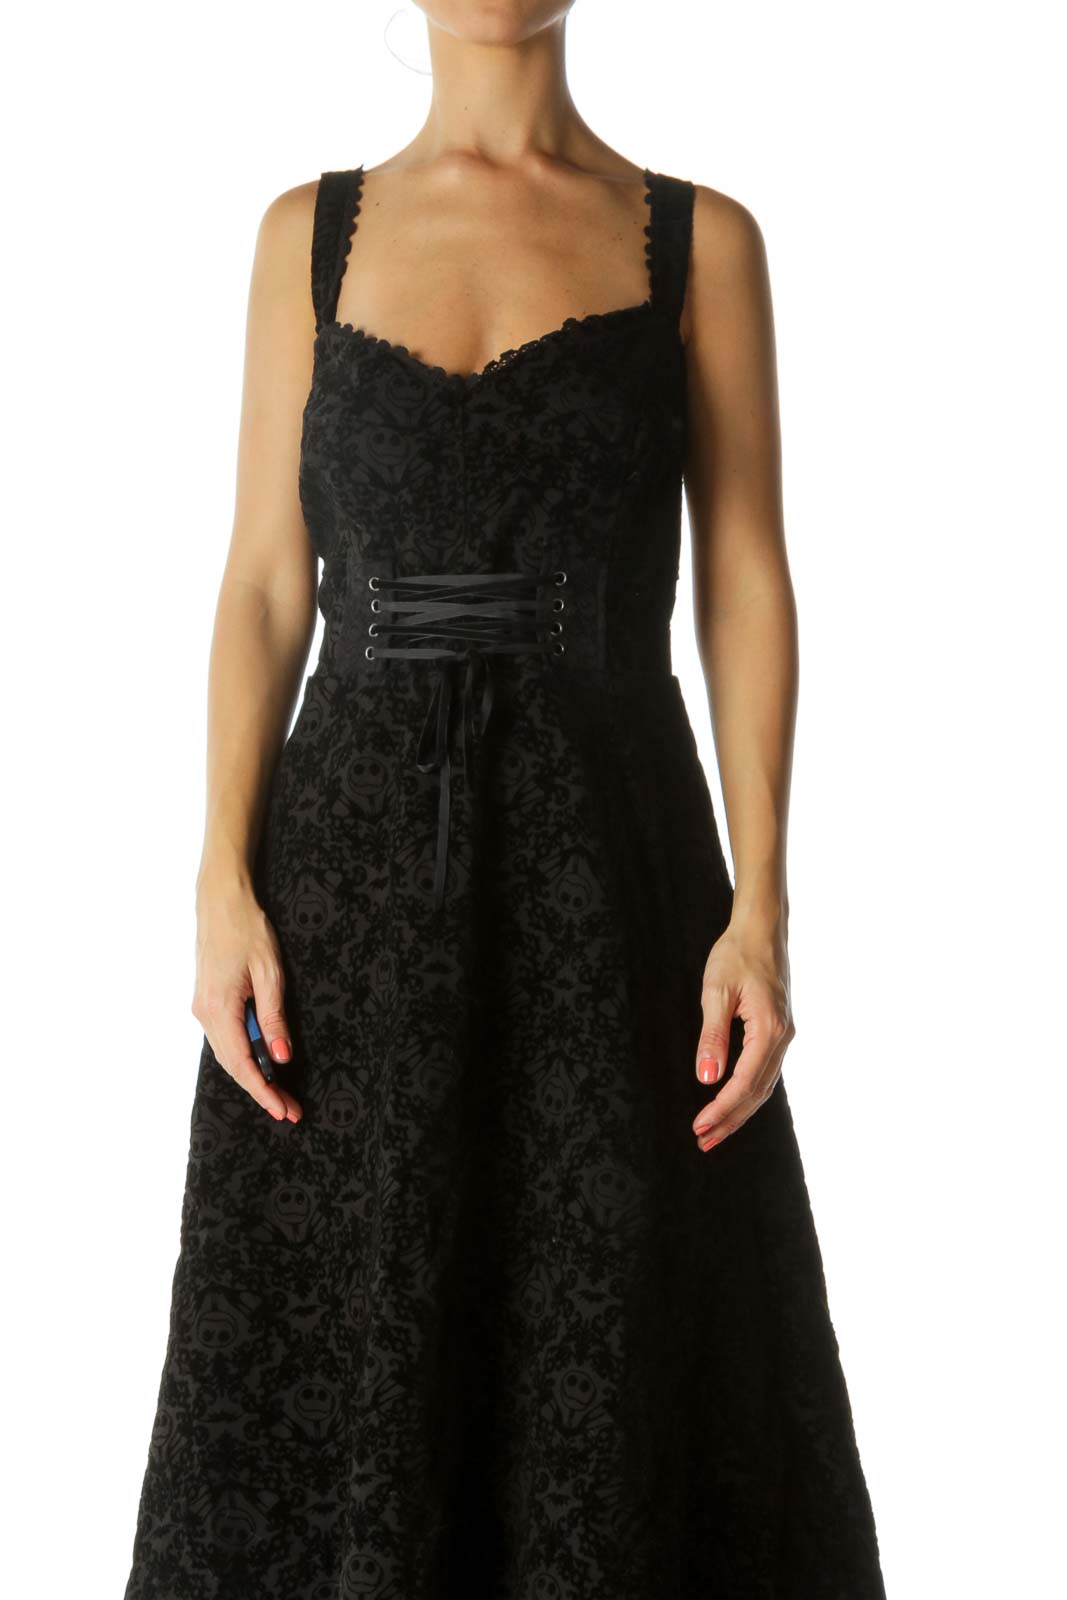 Black Movie Character Velvet Jacquard Front-Lace-Up Tulle Textured Stretch Dress Front